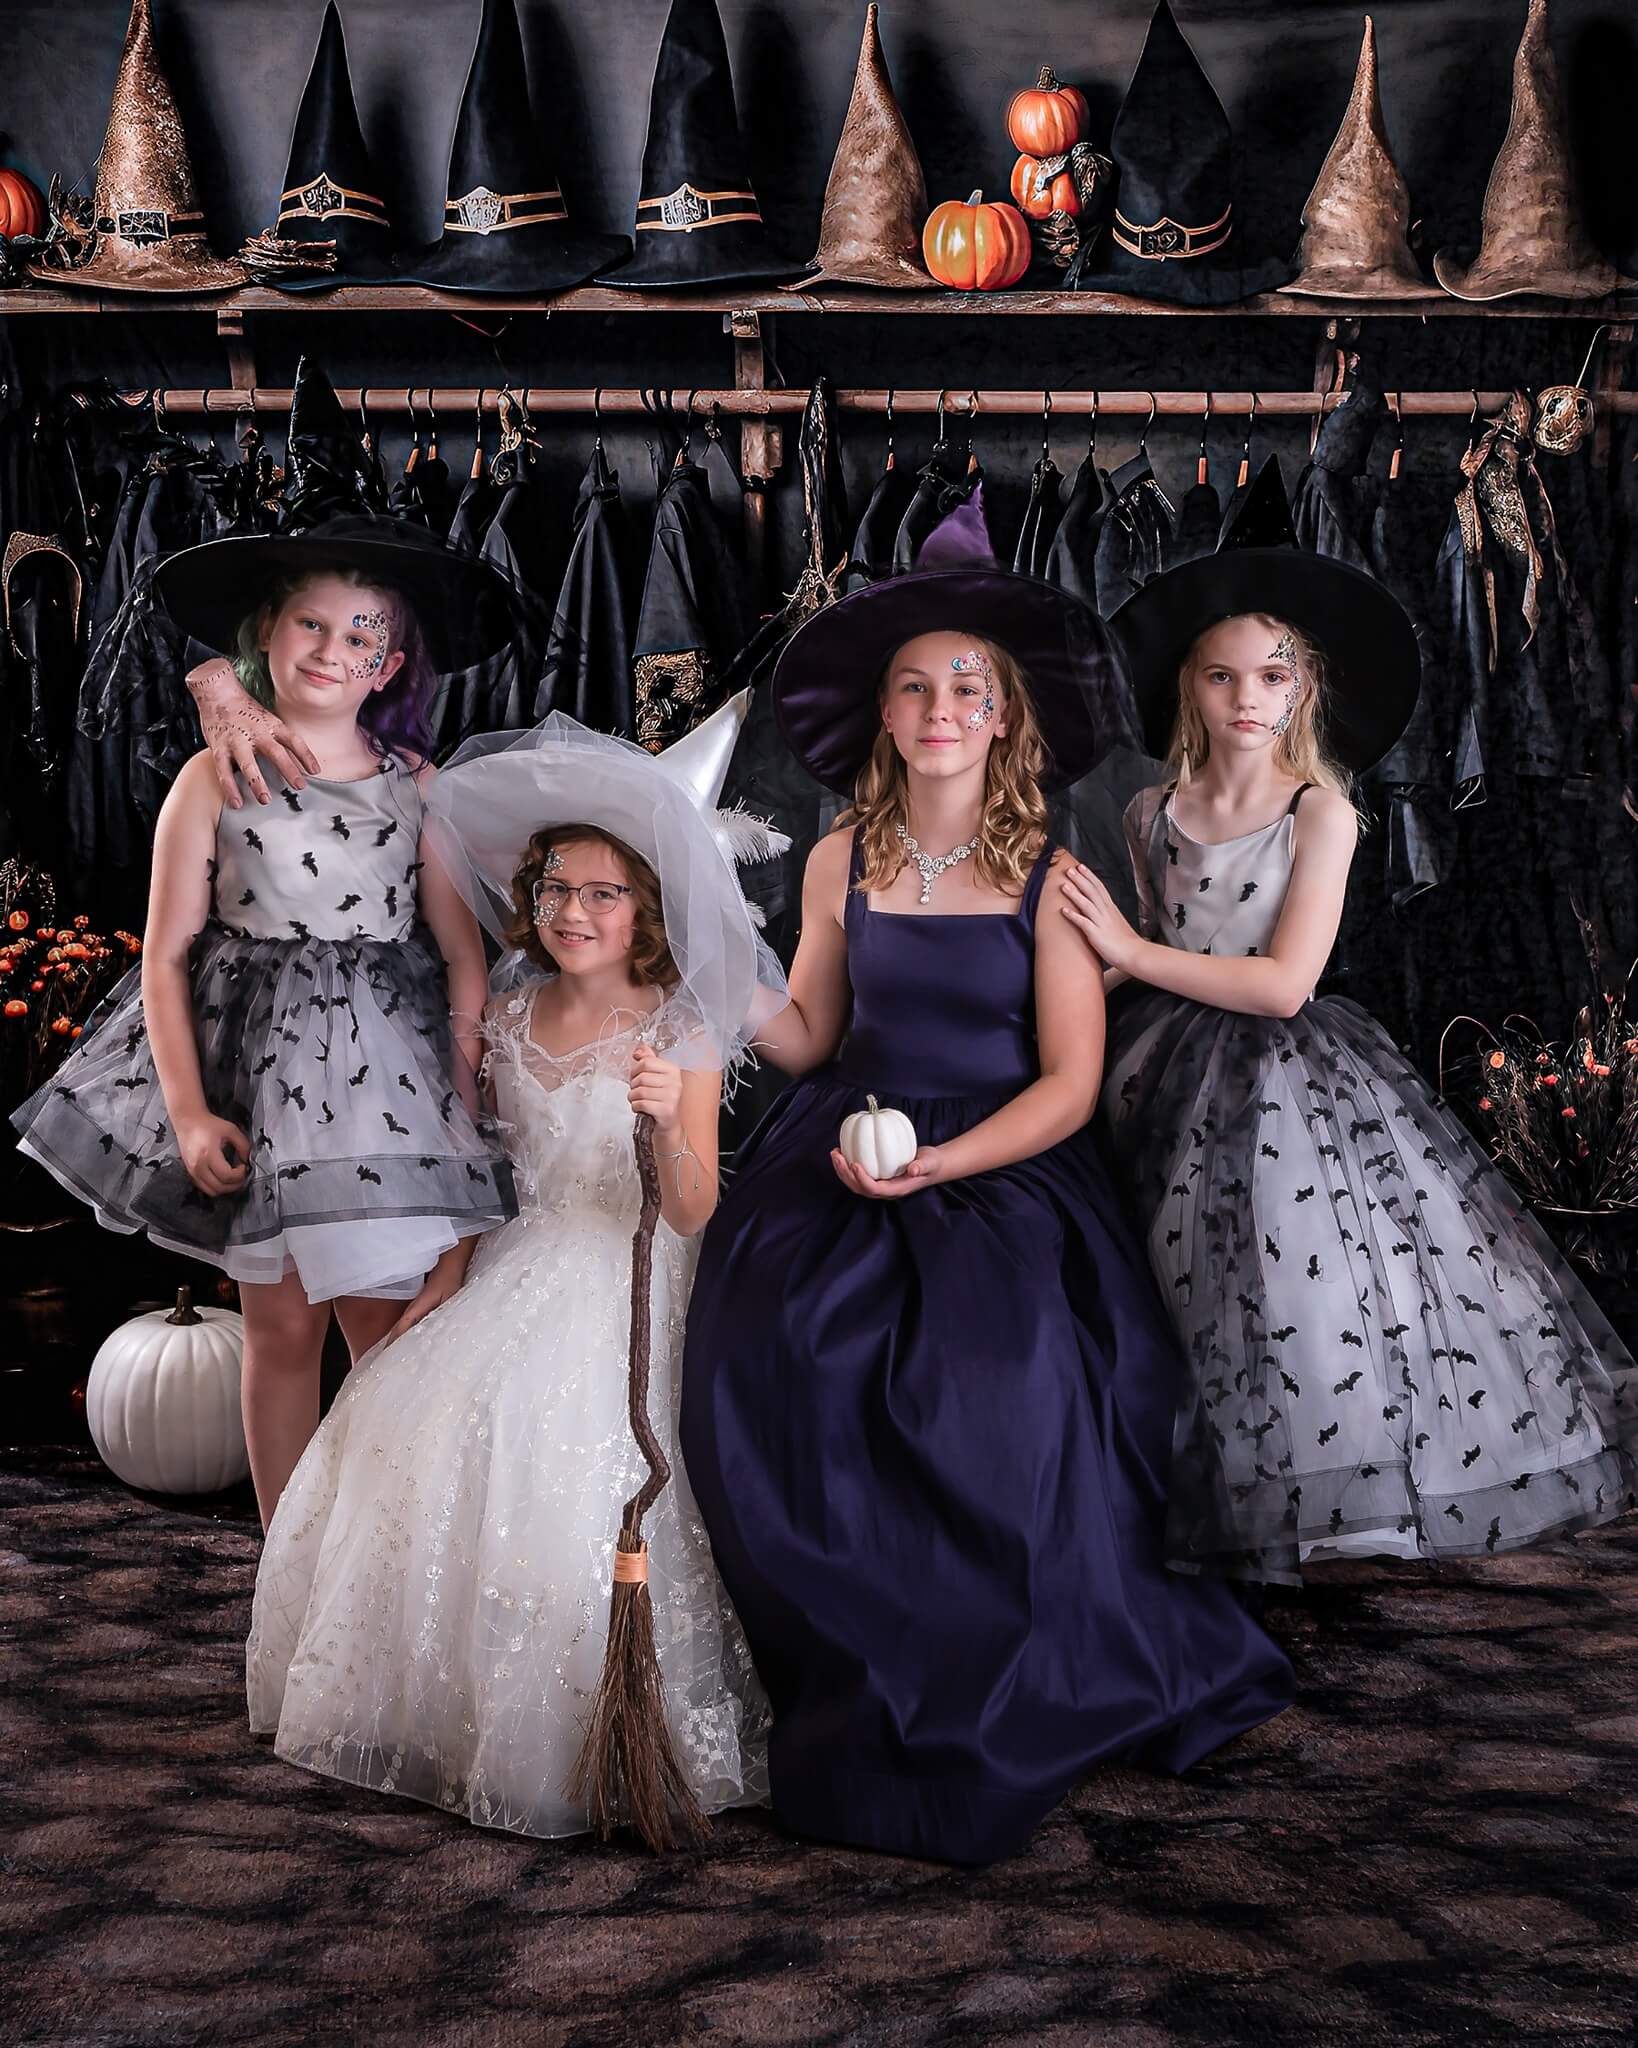 Kate Halloween Dresses Backdrop for Photography